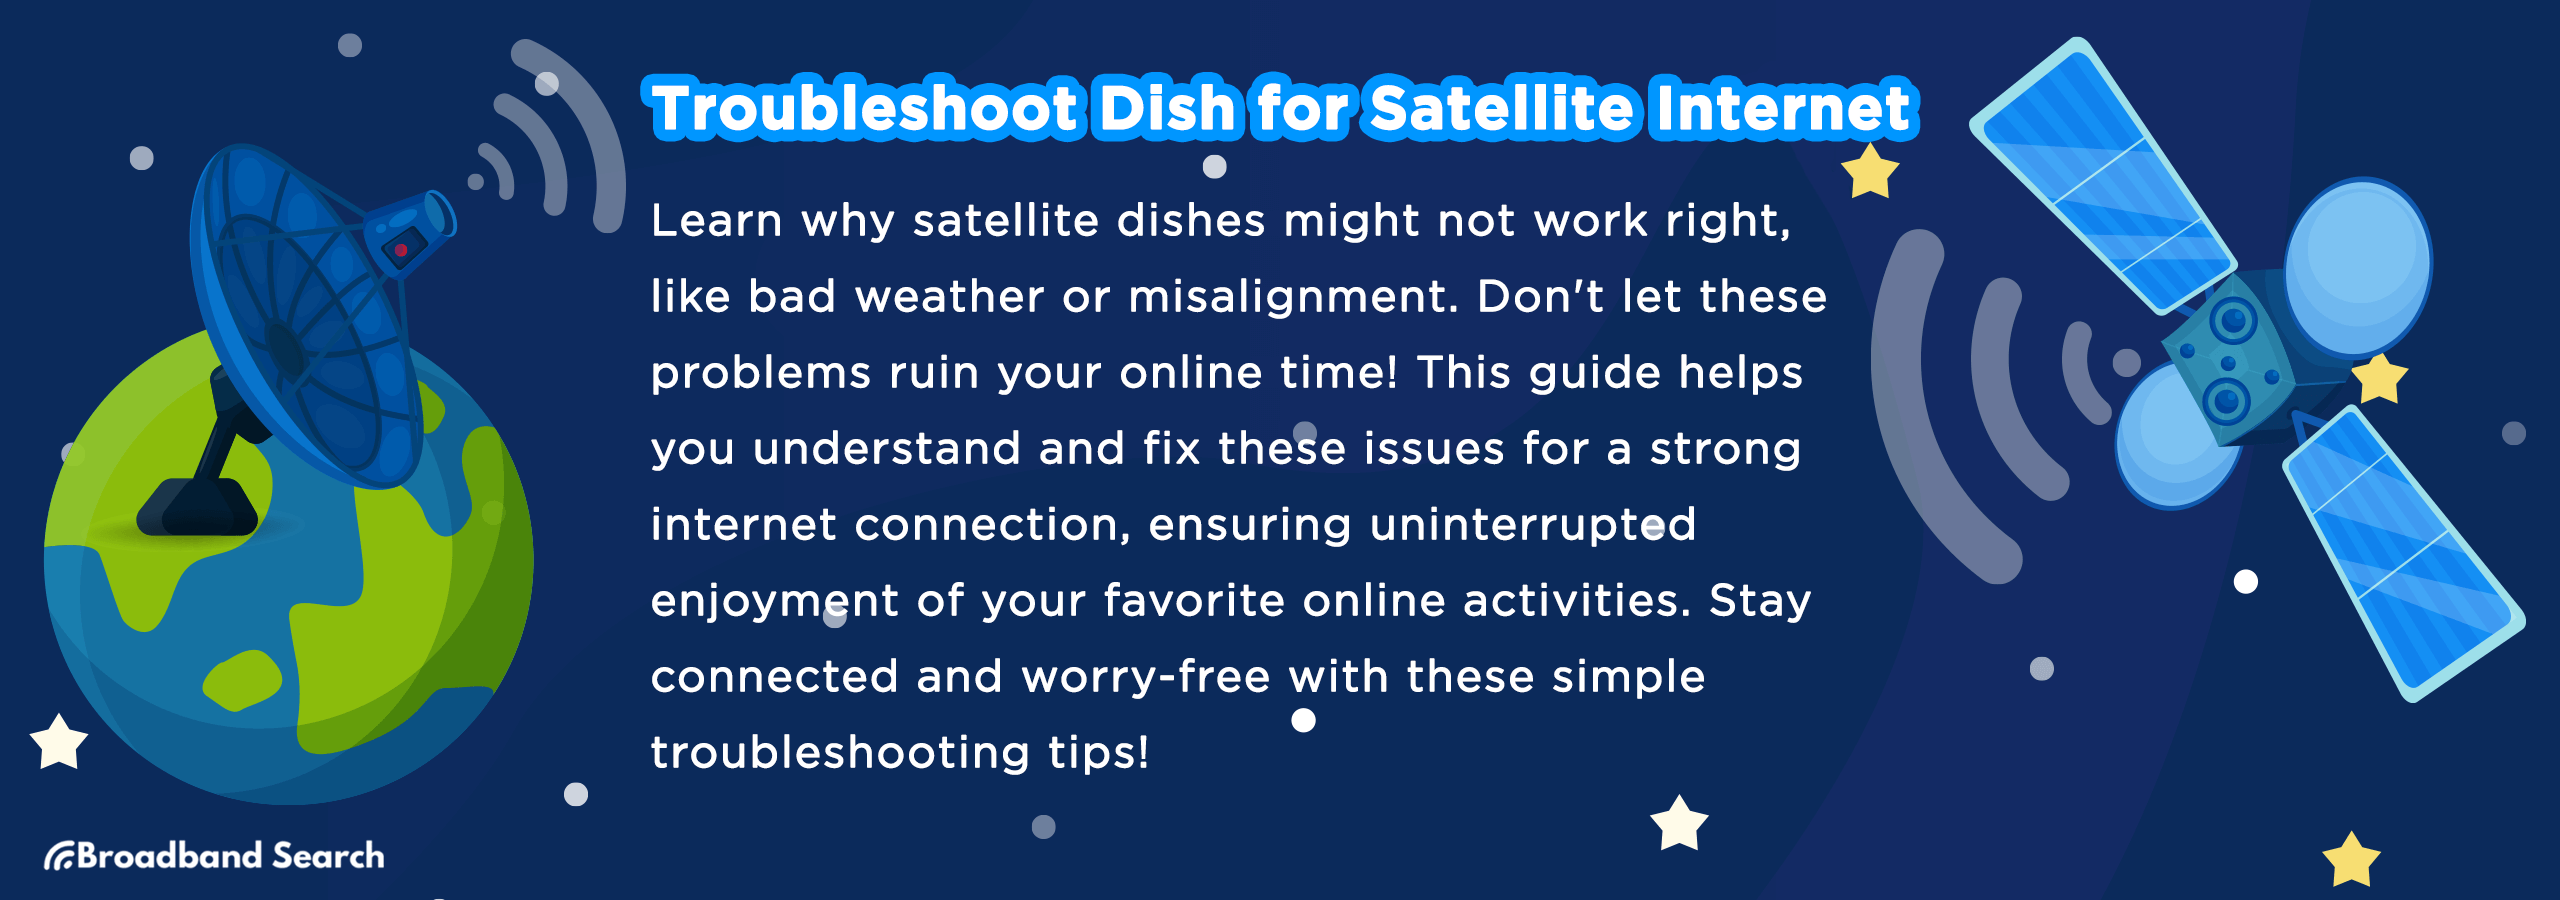 Satellite Internet Issues? Here’s How to Troubleshoot Your Satellite Dish